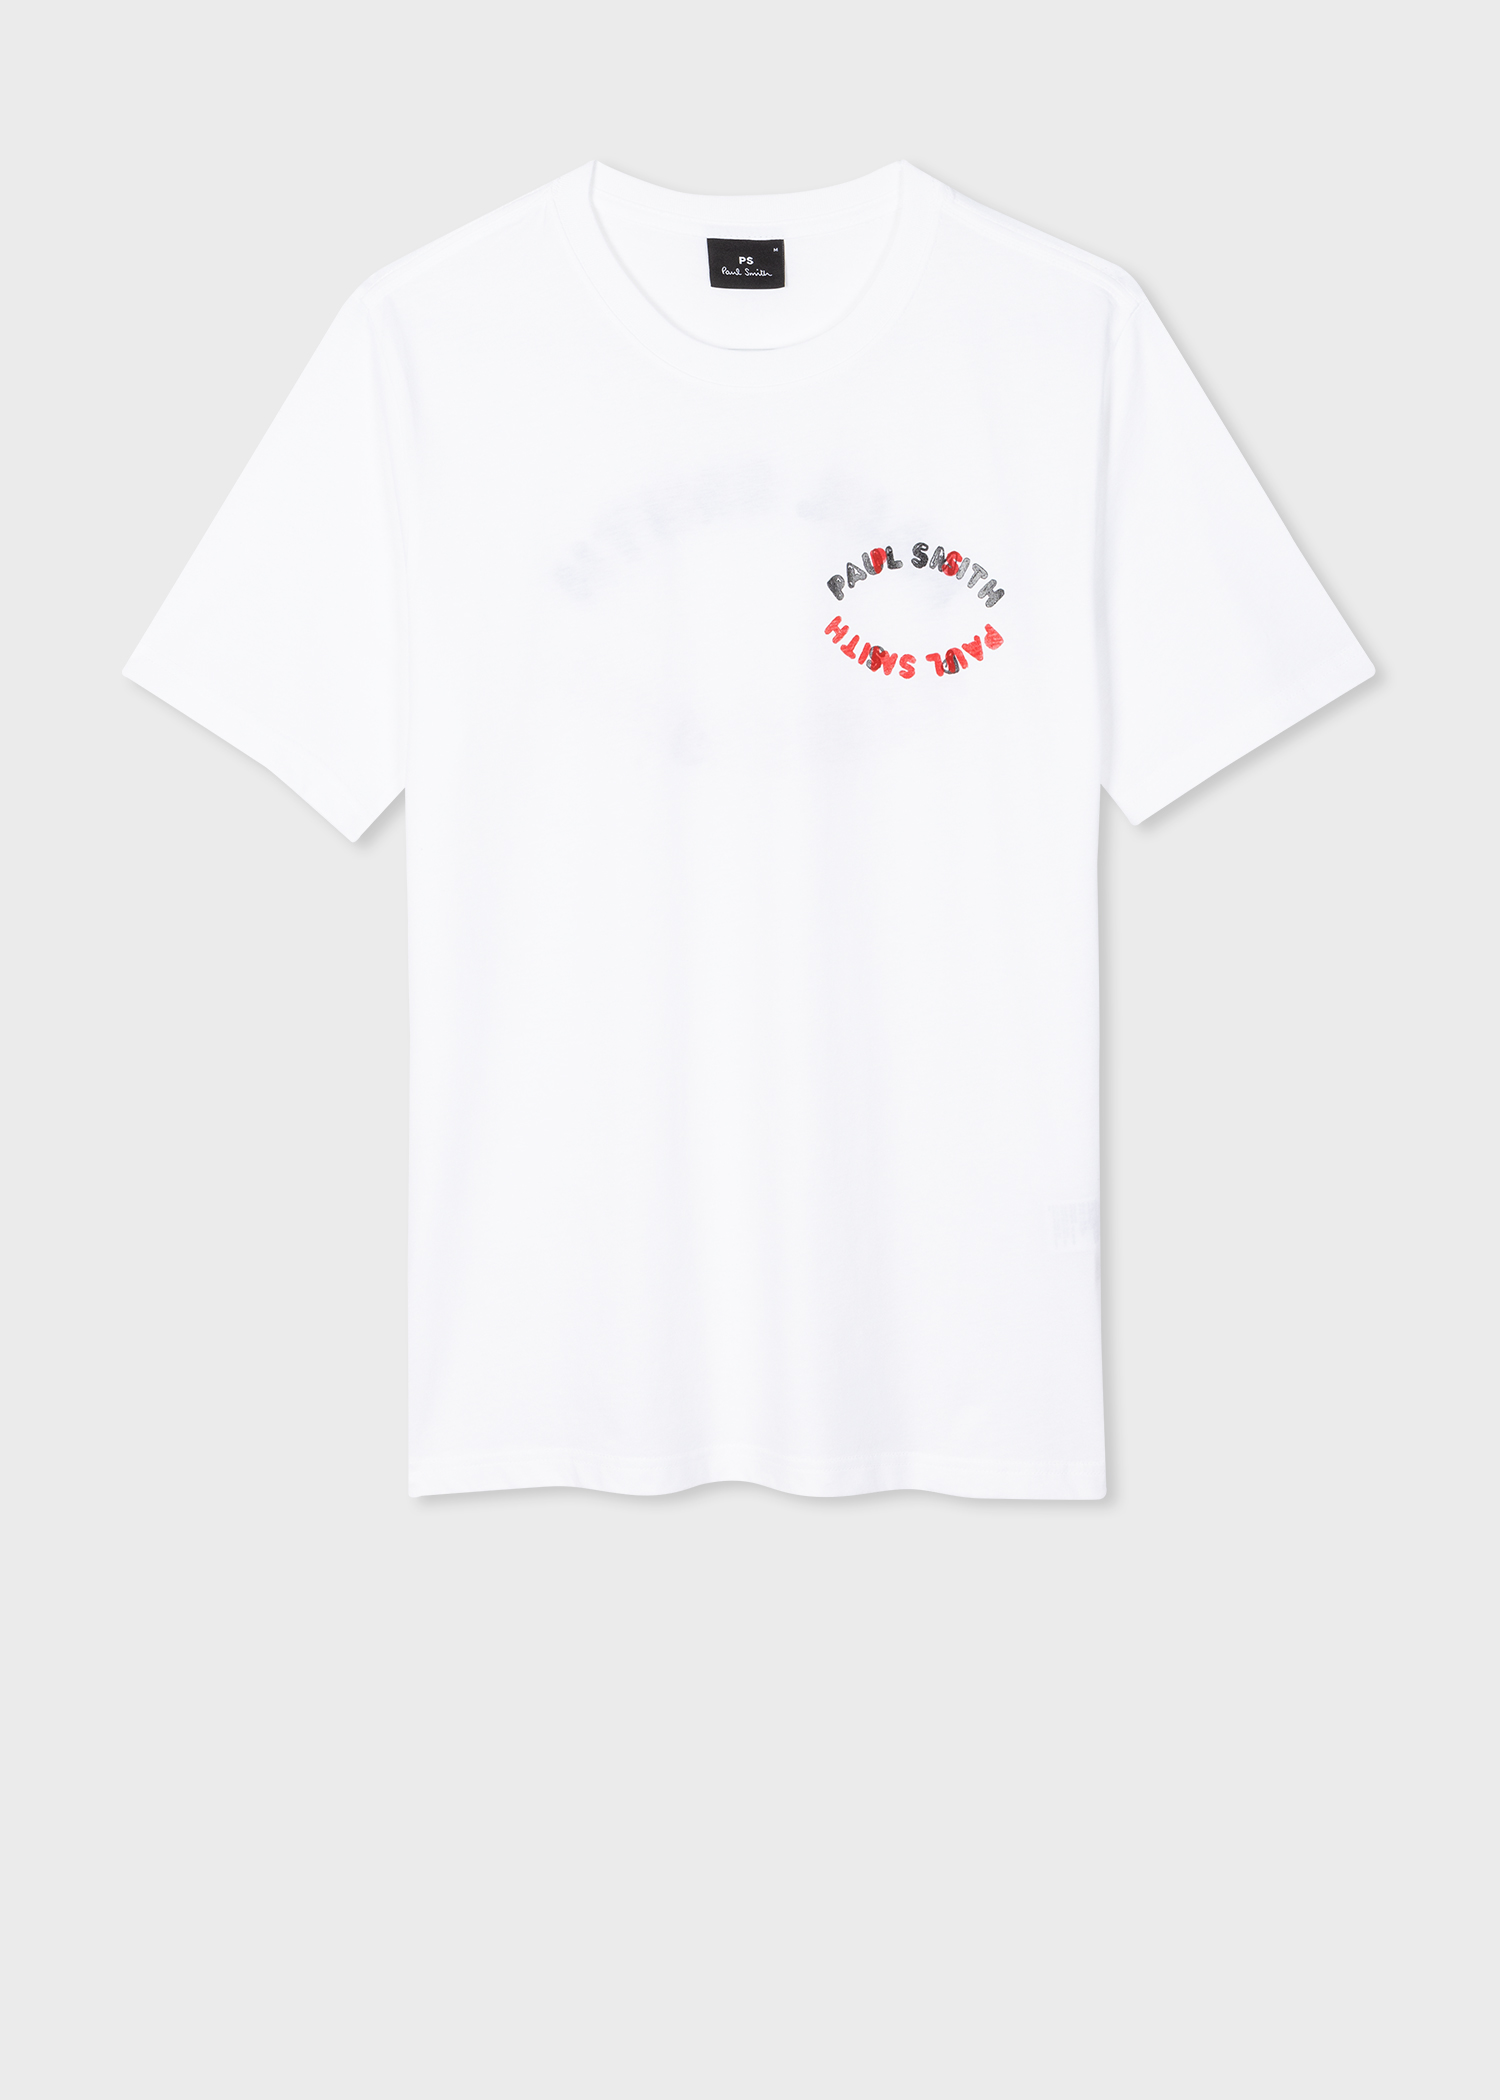 Designer T-Shirts For Men | PS Happy | Paul Smith